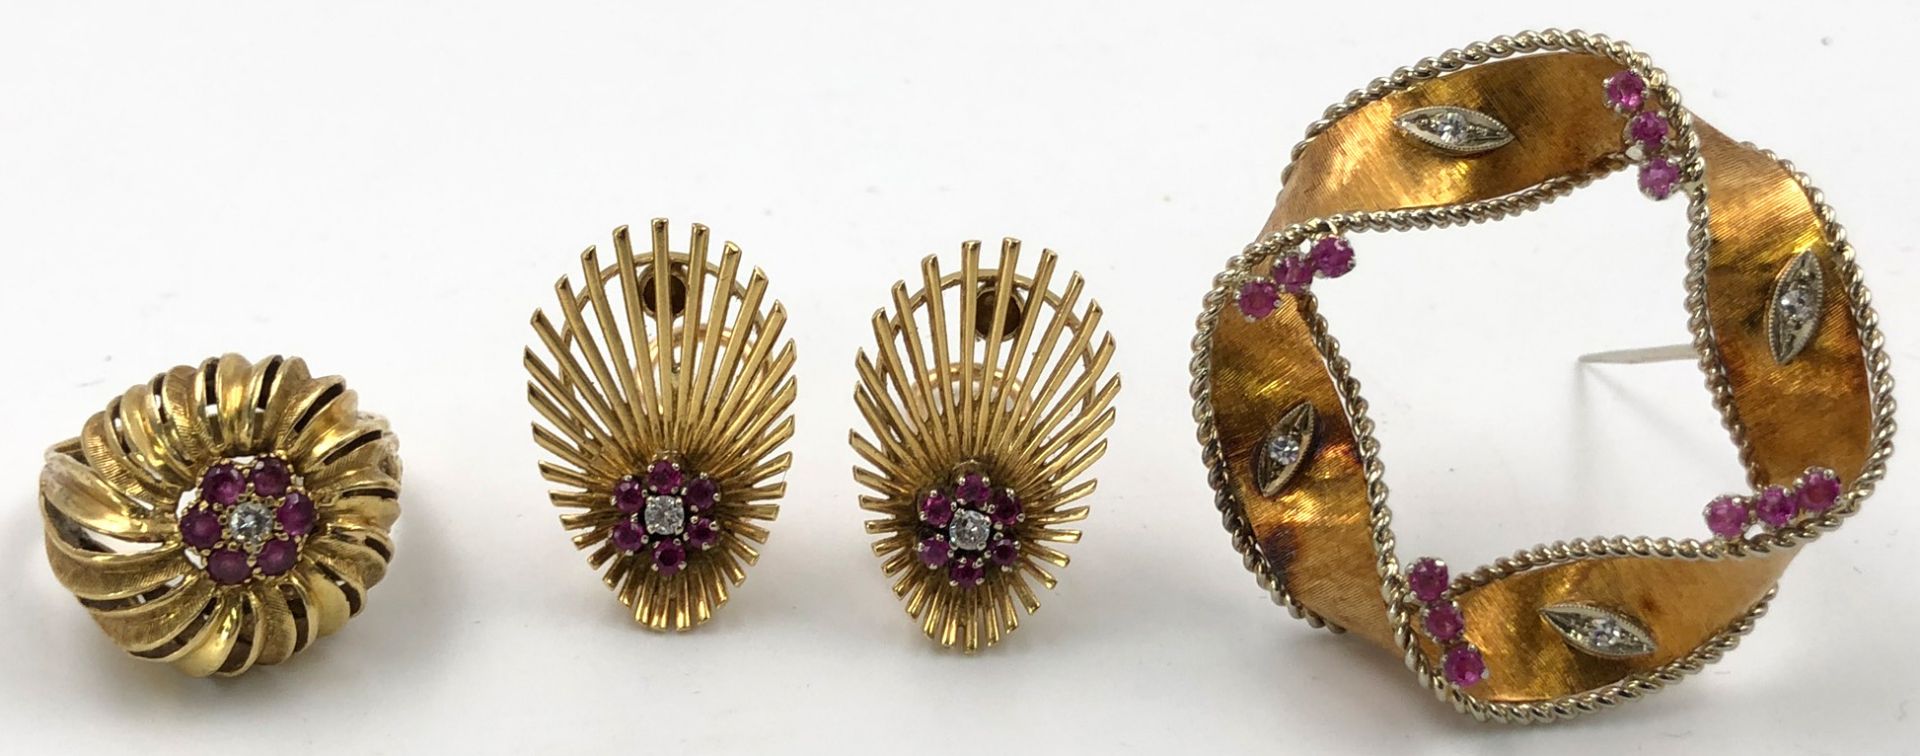 Set. 750 gold. Pair of earrings, ring and brooch. Diamonds and rubies.27.8 grams total weight.